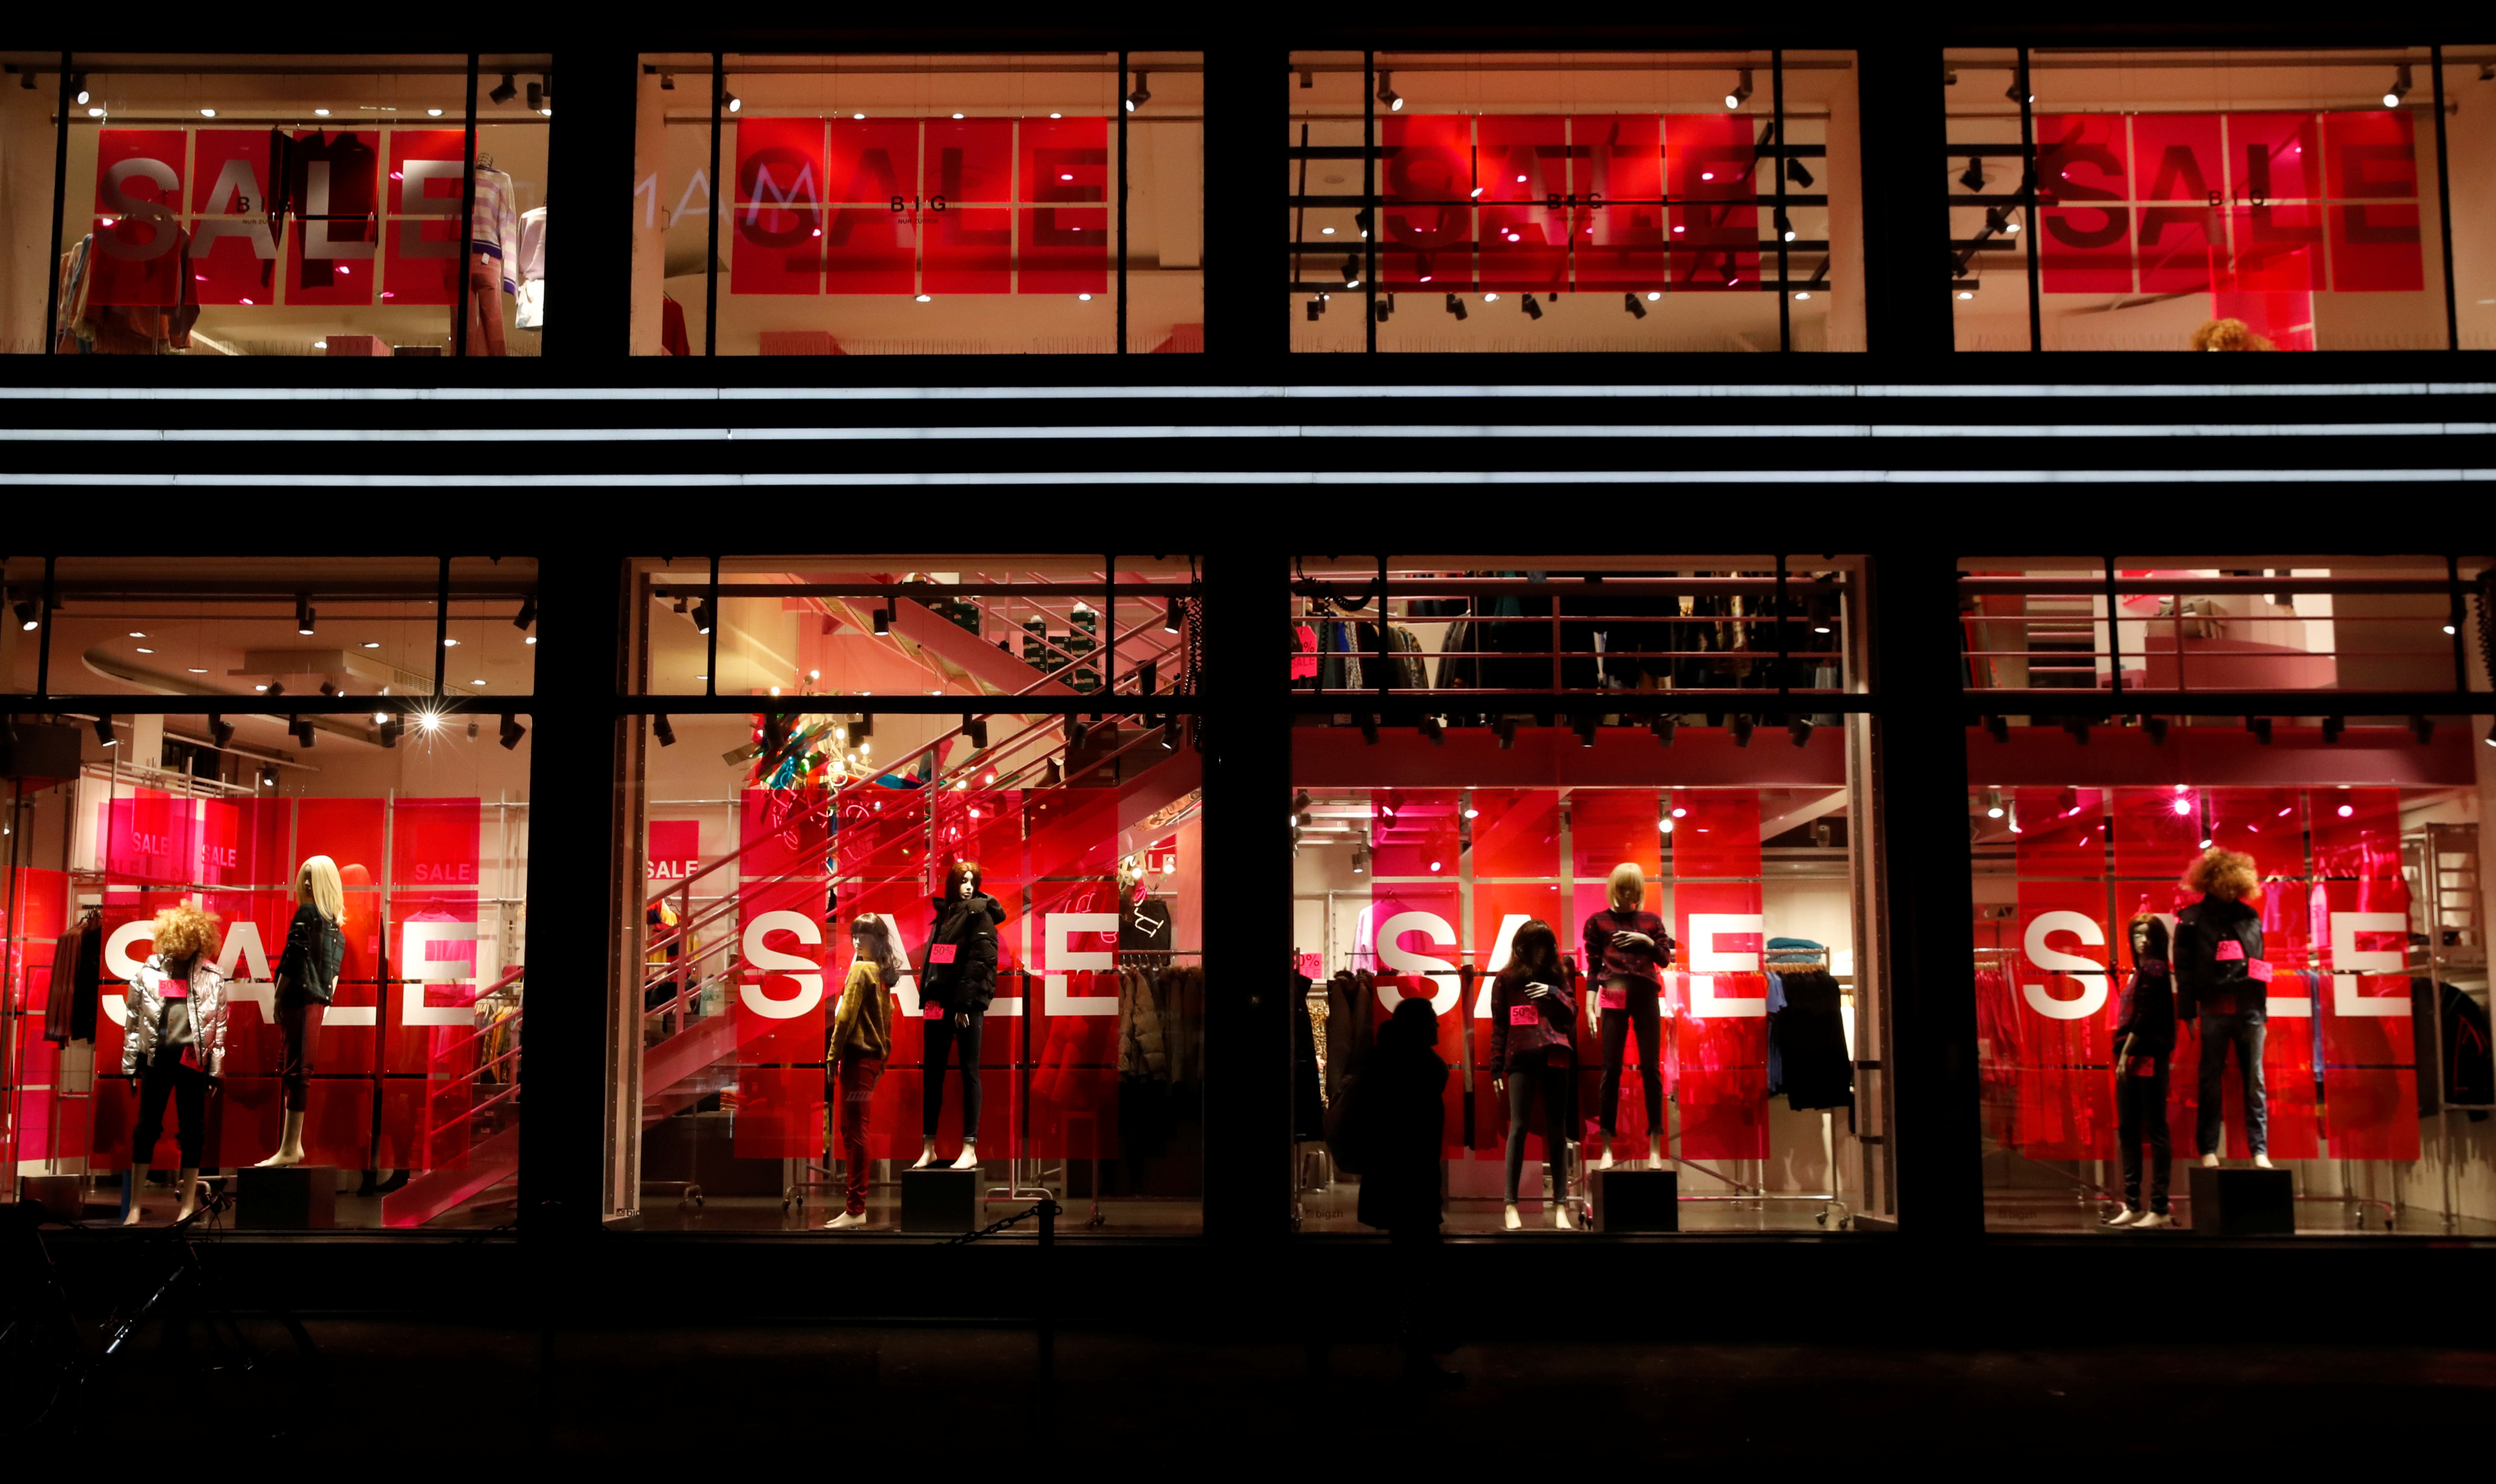 Sale discounts are offered on display windows of a H&M store in Zurich